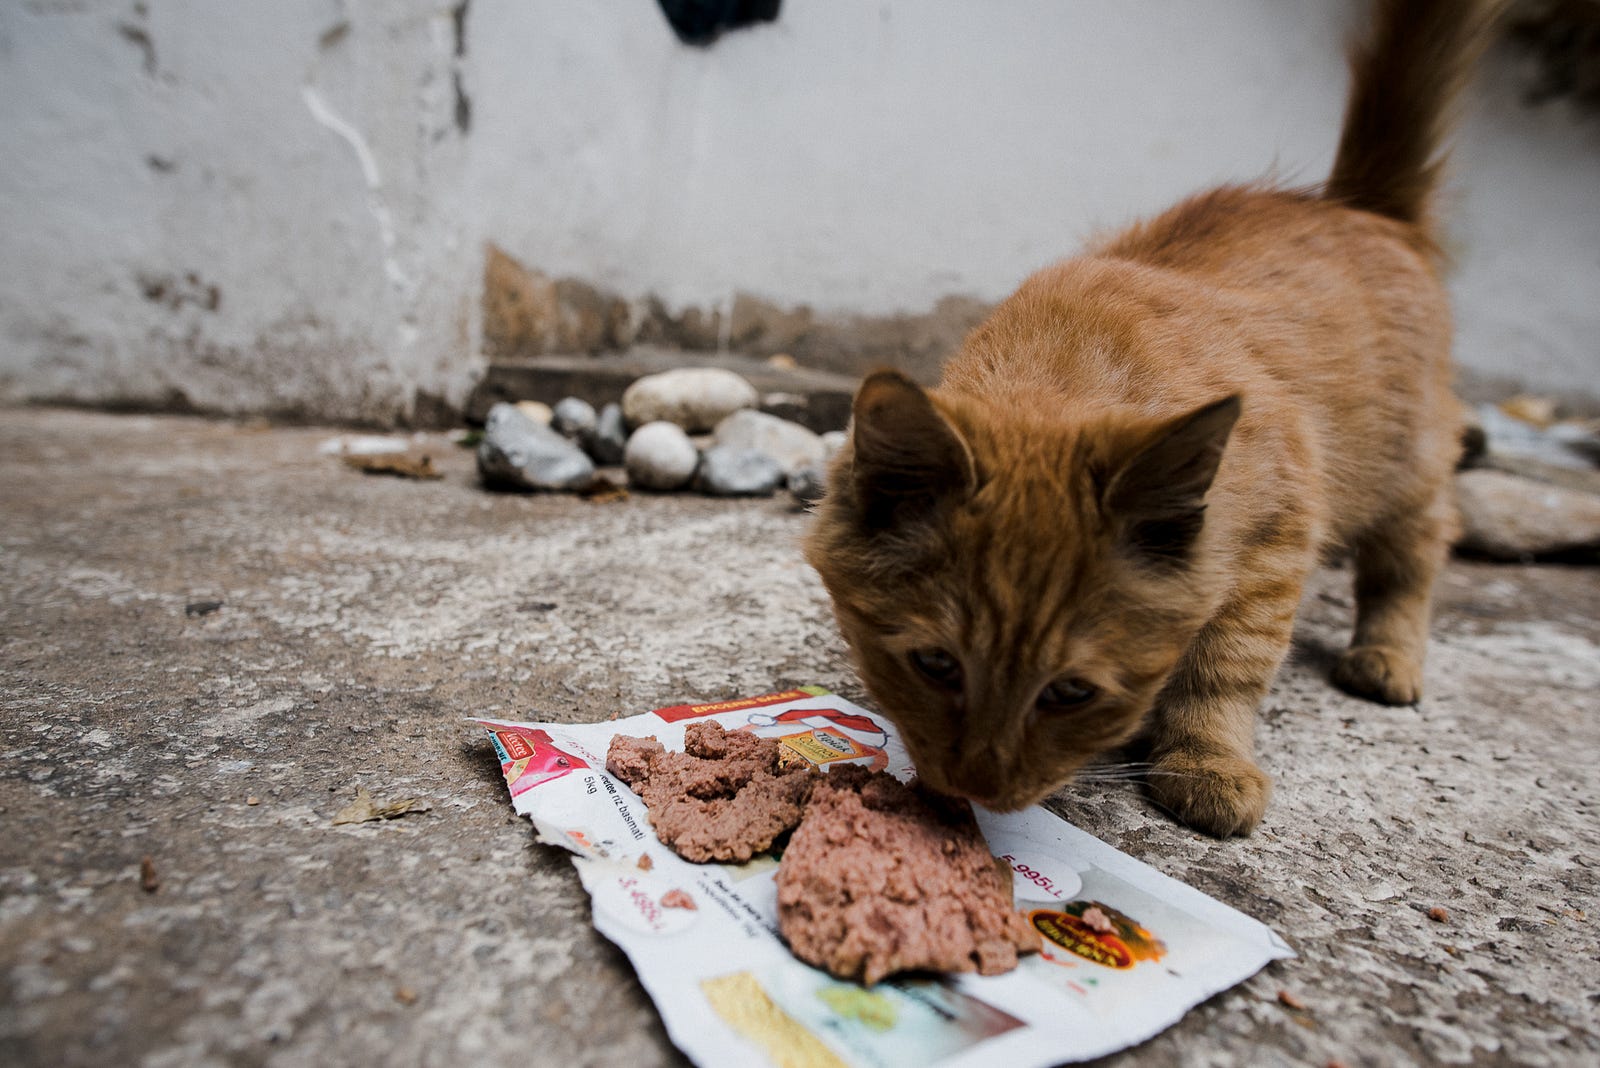 A young tabby cat pokes at soft food left on a piece of paper in the street.